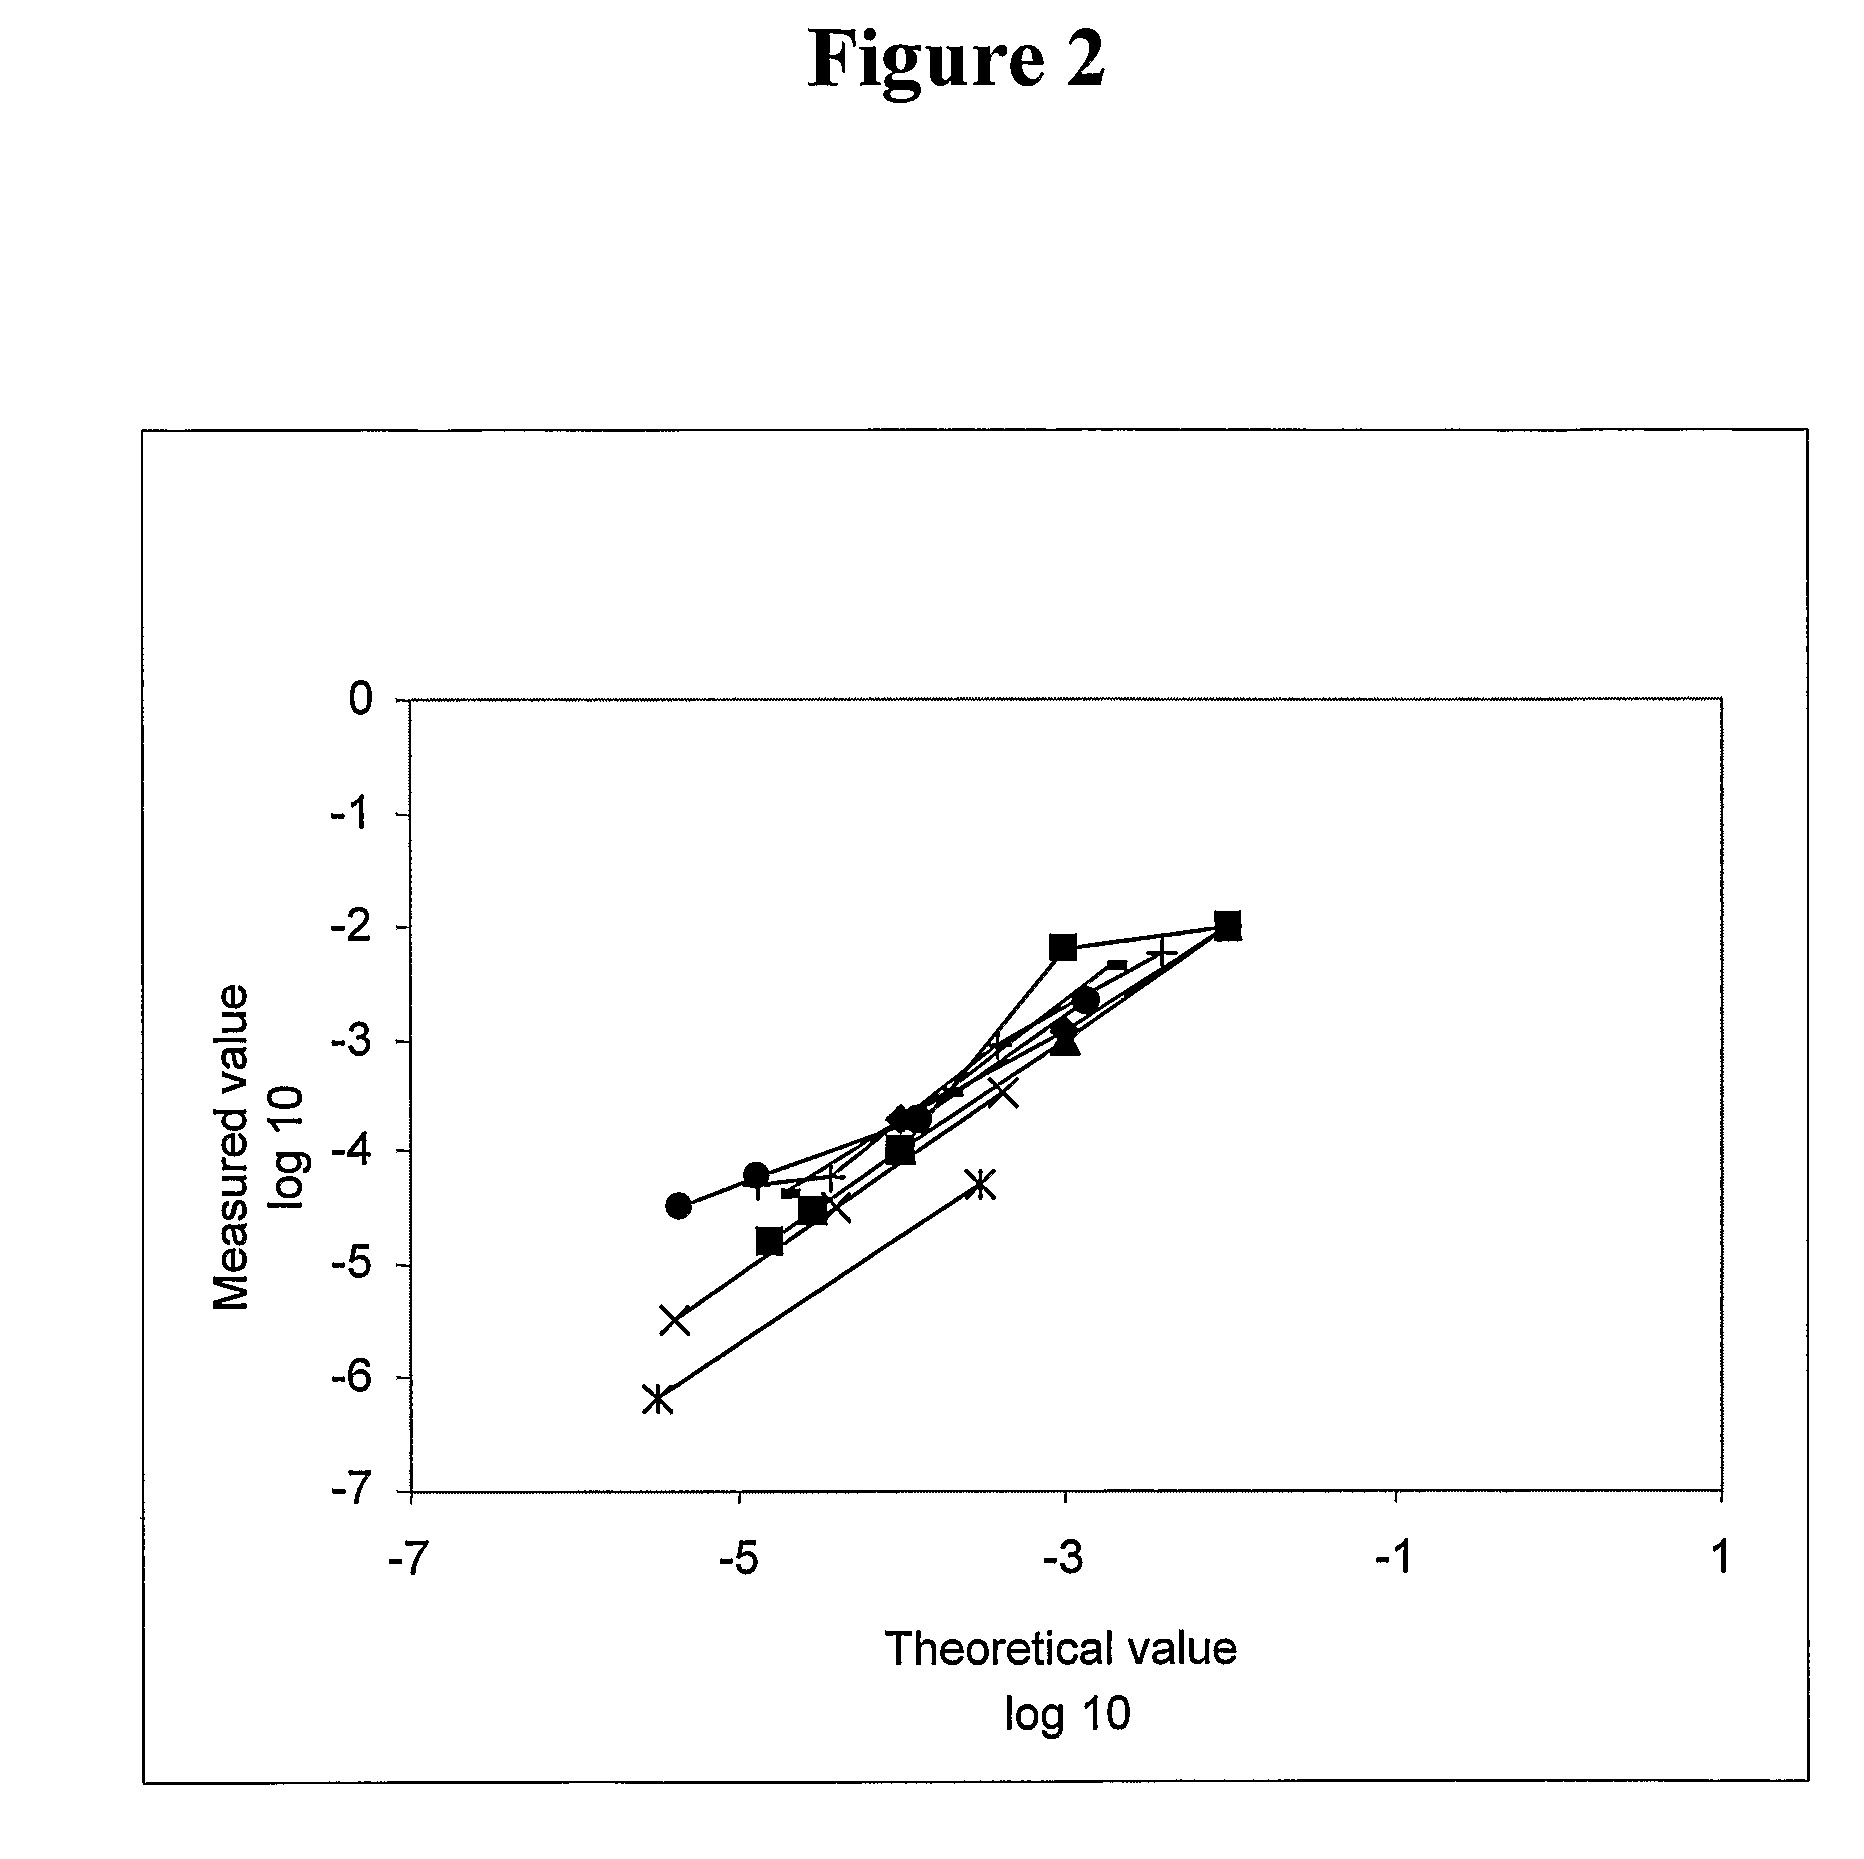 Detecting targets using nucleic acids having both a variable region and a conserved region